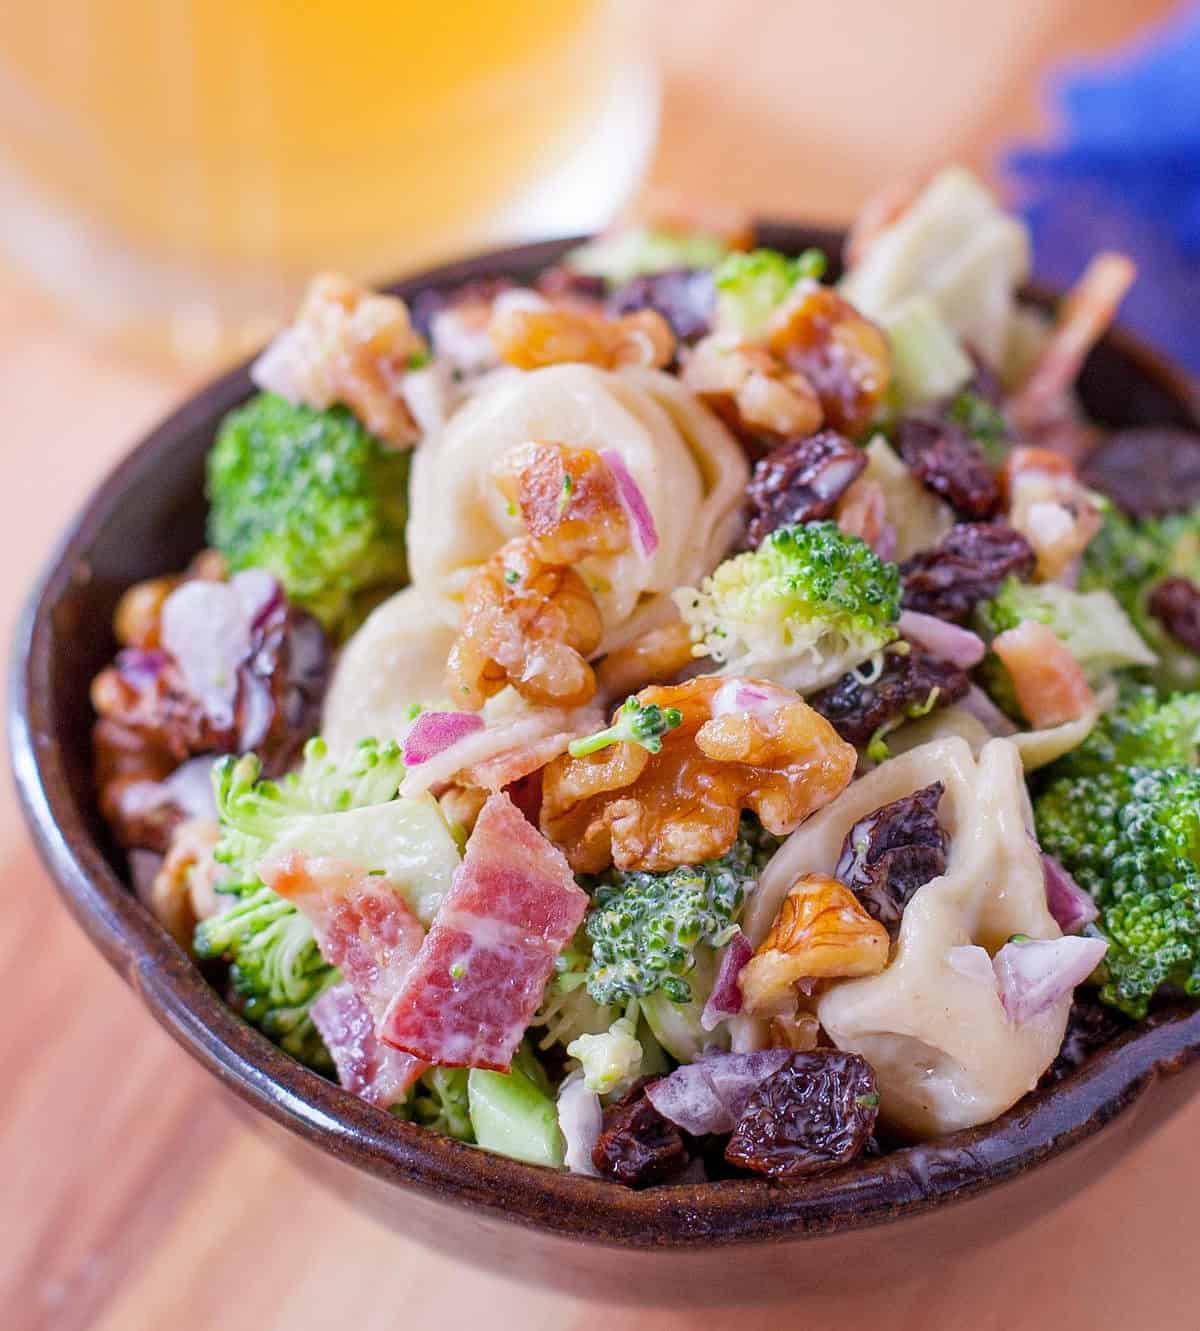  Brighten up your next gathering with this colorful broccoli and tortellini salad.